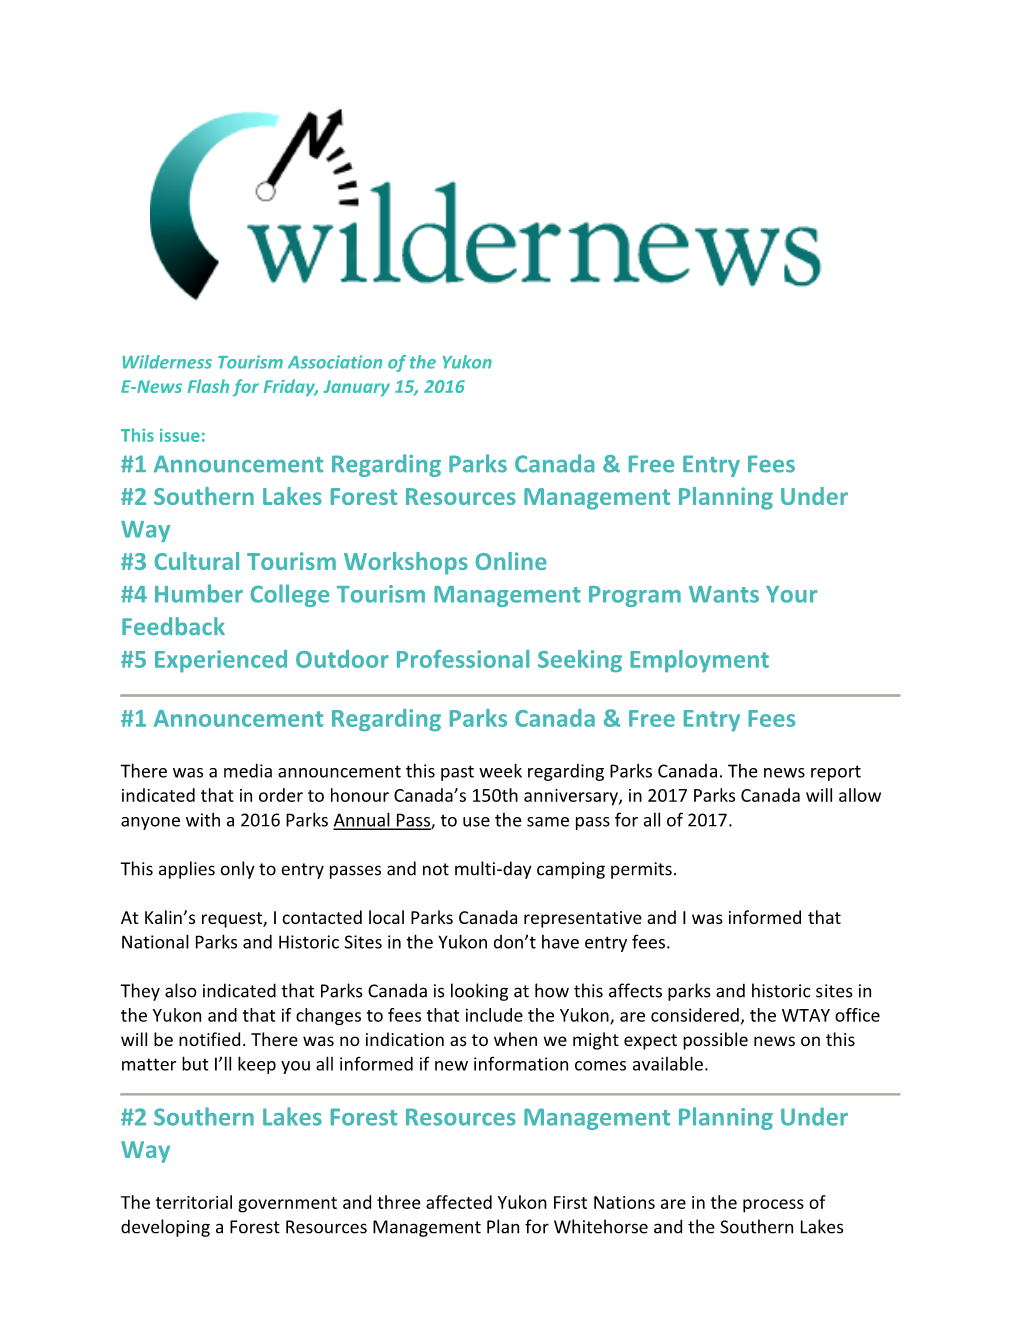 Wilderness Tourism Association of the Yukon E-News Flash for Friday, January 15, 2016